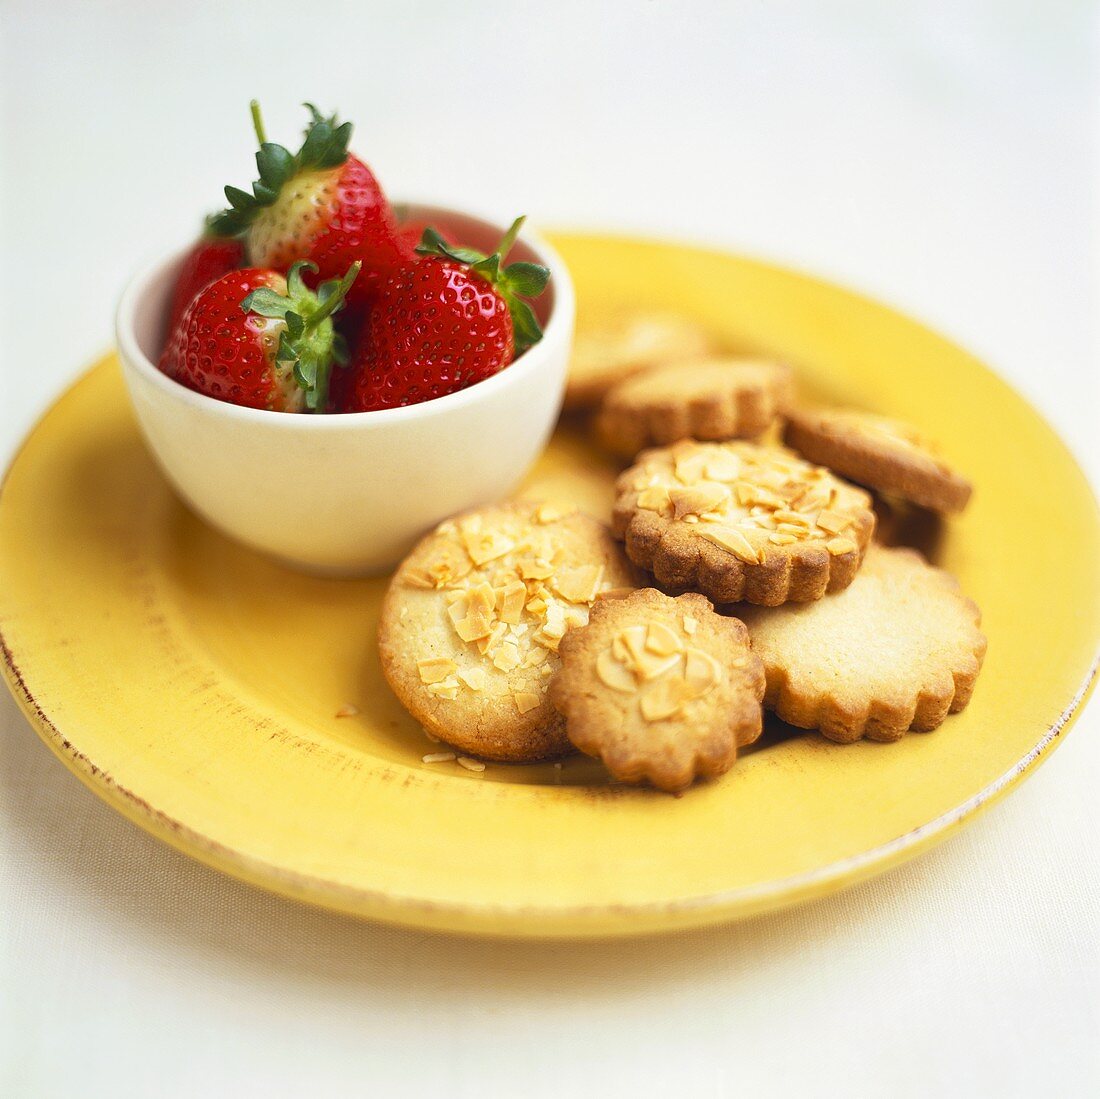 Almond biscuits and fresh strawberries